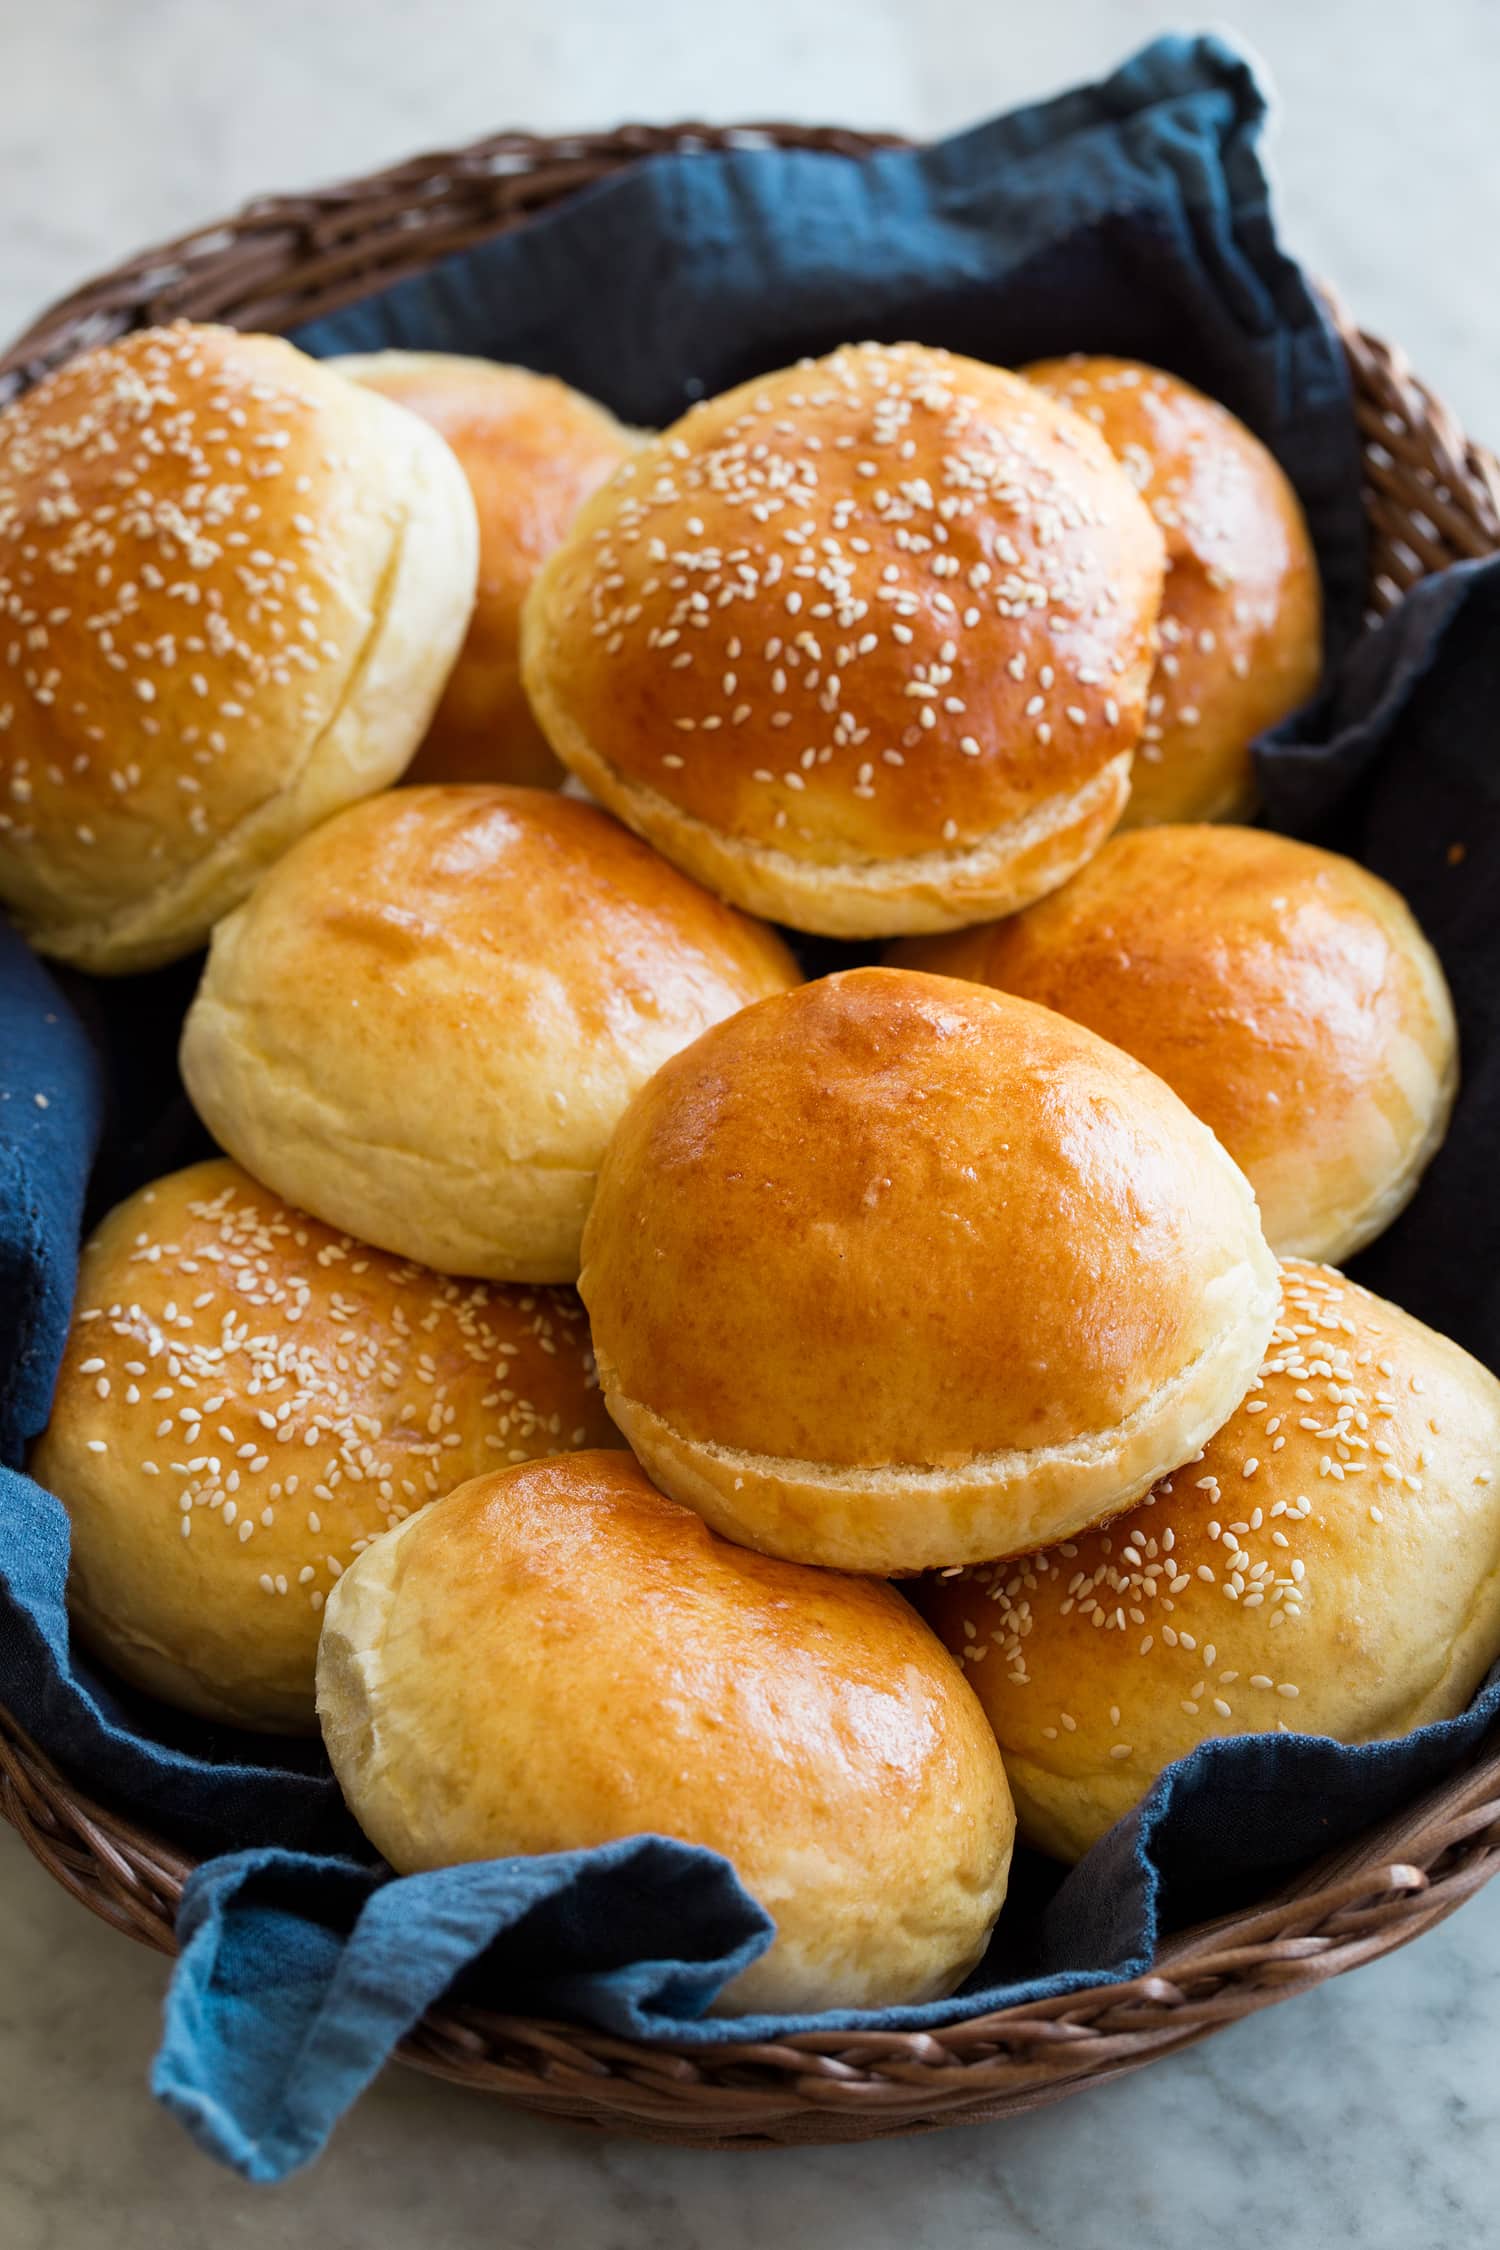 Homemade hamburger buns shown in a basket with a blue cloth.